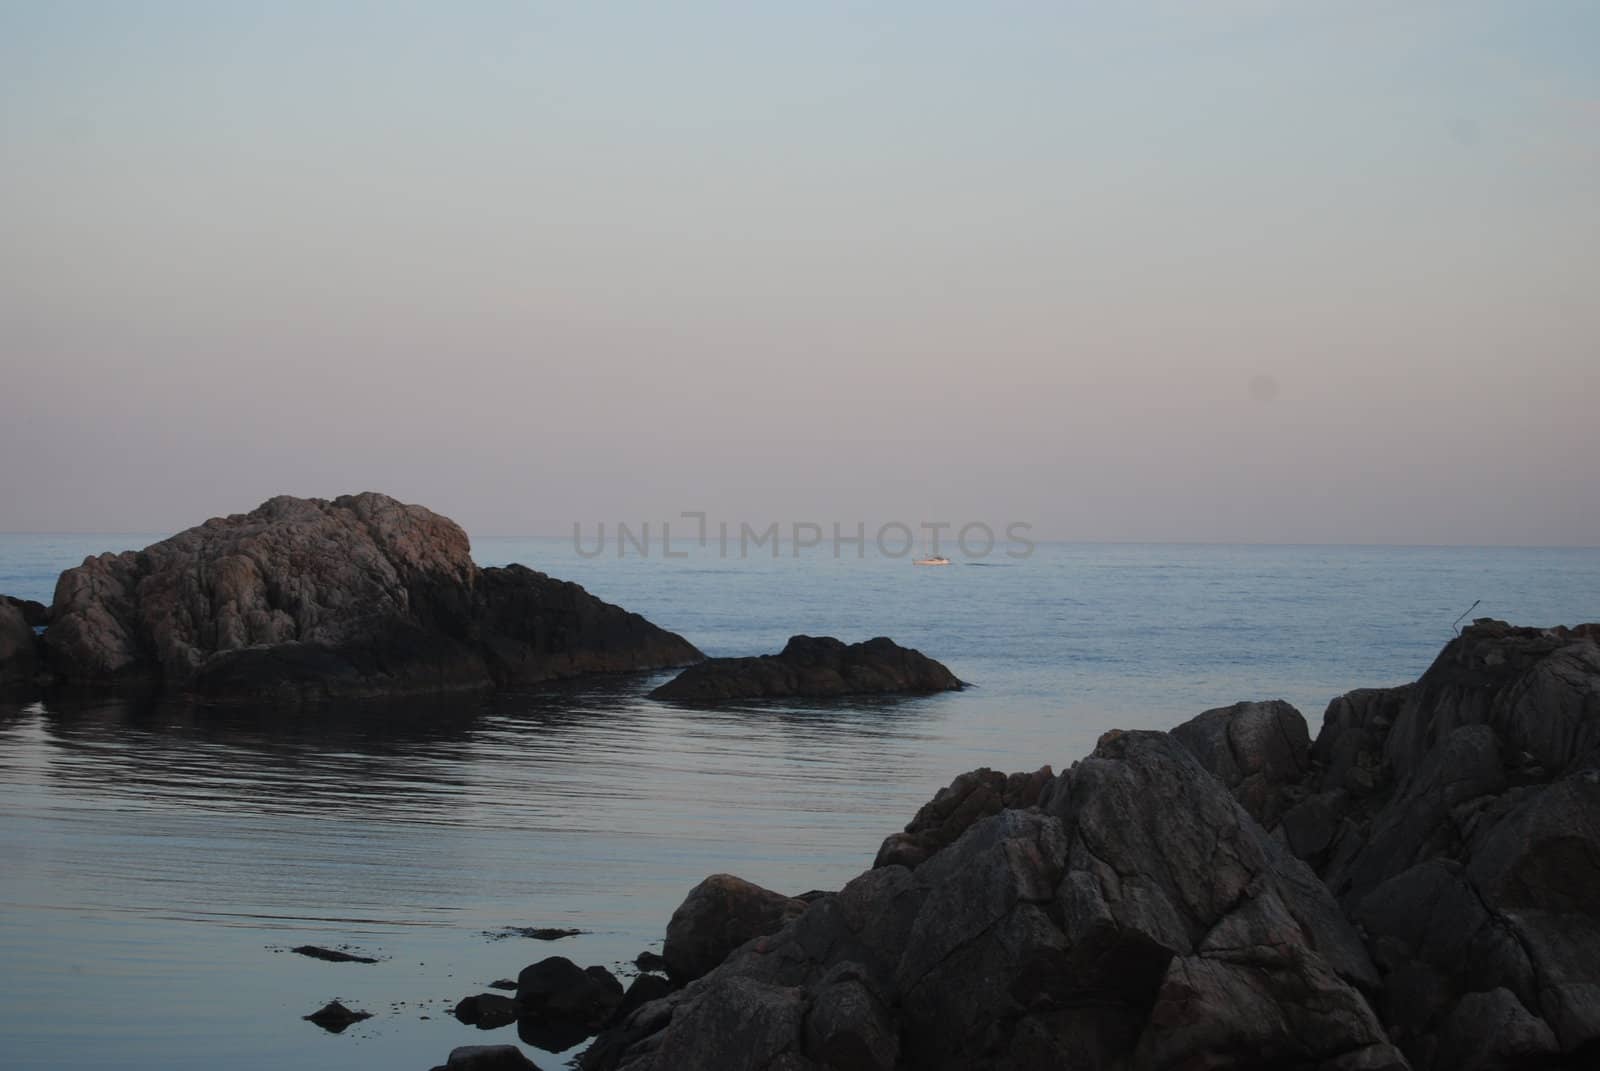 Pictures from sunset on Lindesnes Lighthouse and area around,  southern tip of Norway. 